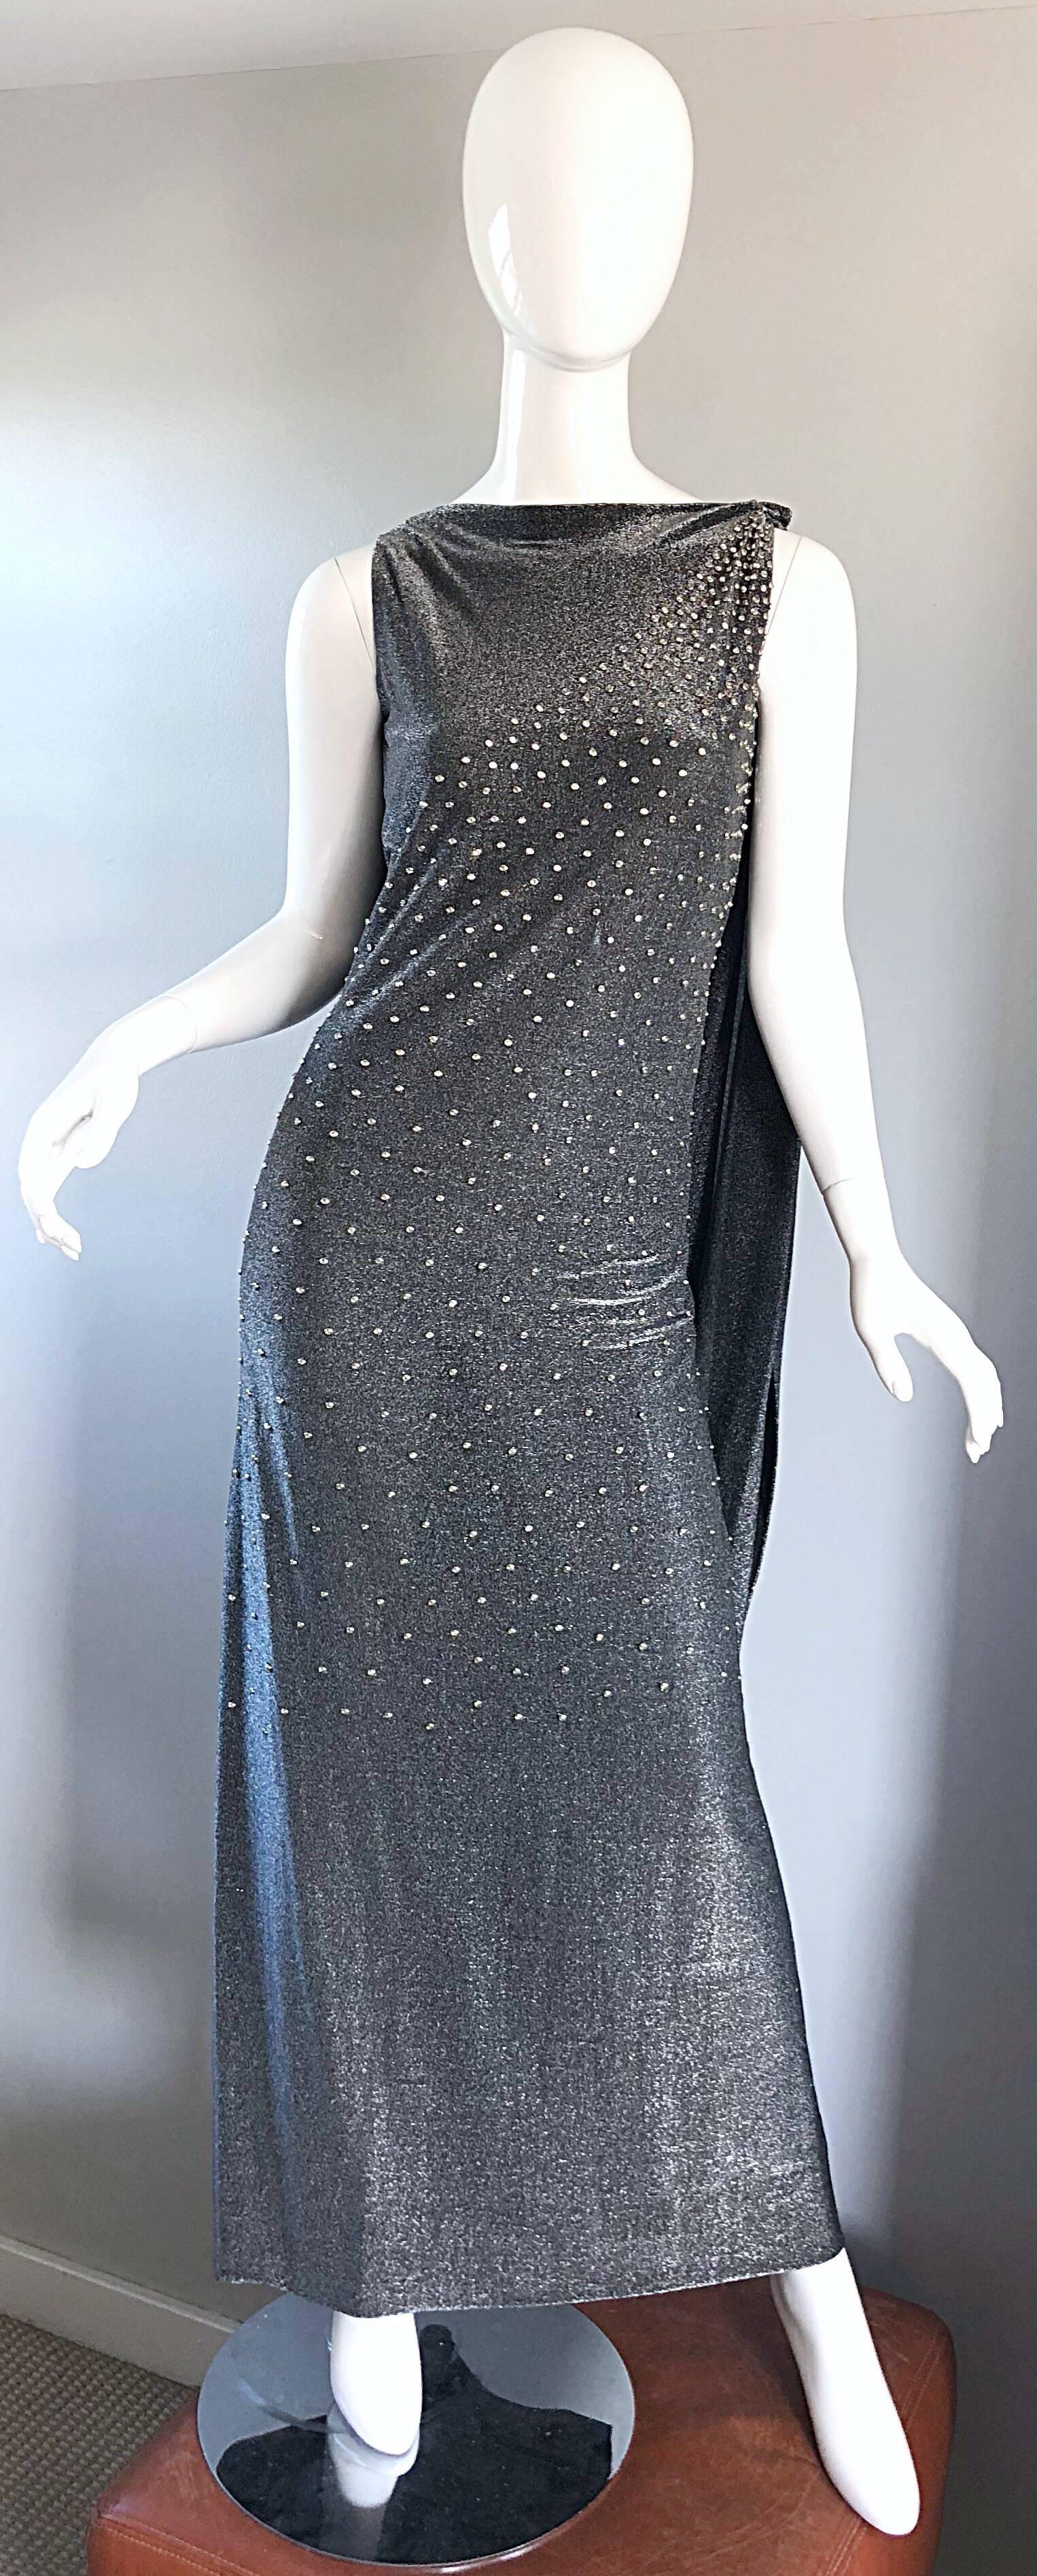 Rare Musuem Worthy 60s GEOFFREY BEENE Couture gunmetal + silver metallic silk lurex caped evening dress! Luxurioussoft (not scratchy at all) silk lurex fabric. Features hundreds of hand-sewn silver metal studs and rhinestones on the front. Attached